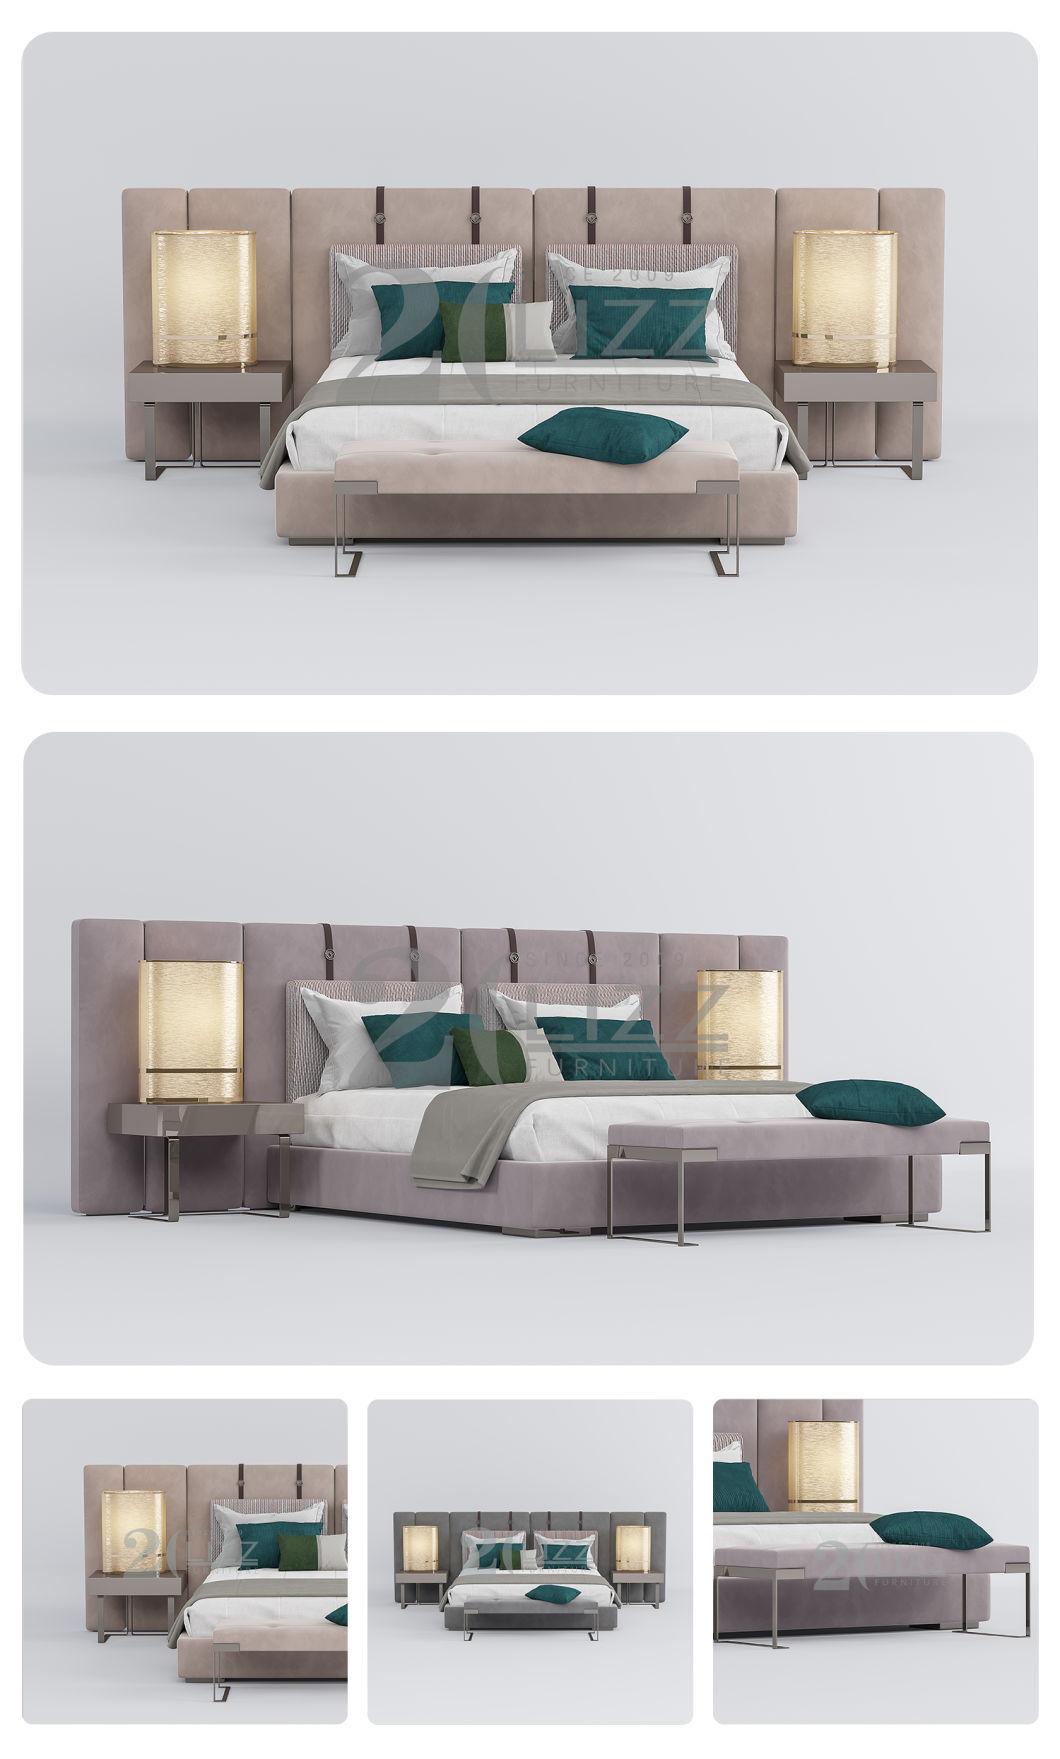 OEM ODM Modern Luxury Upholstered Double King Queen Size Bed Leisure Wood Bedroom Furniture